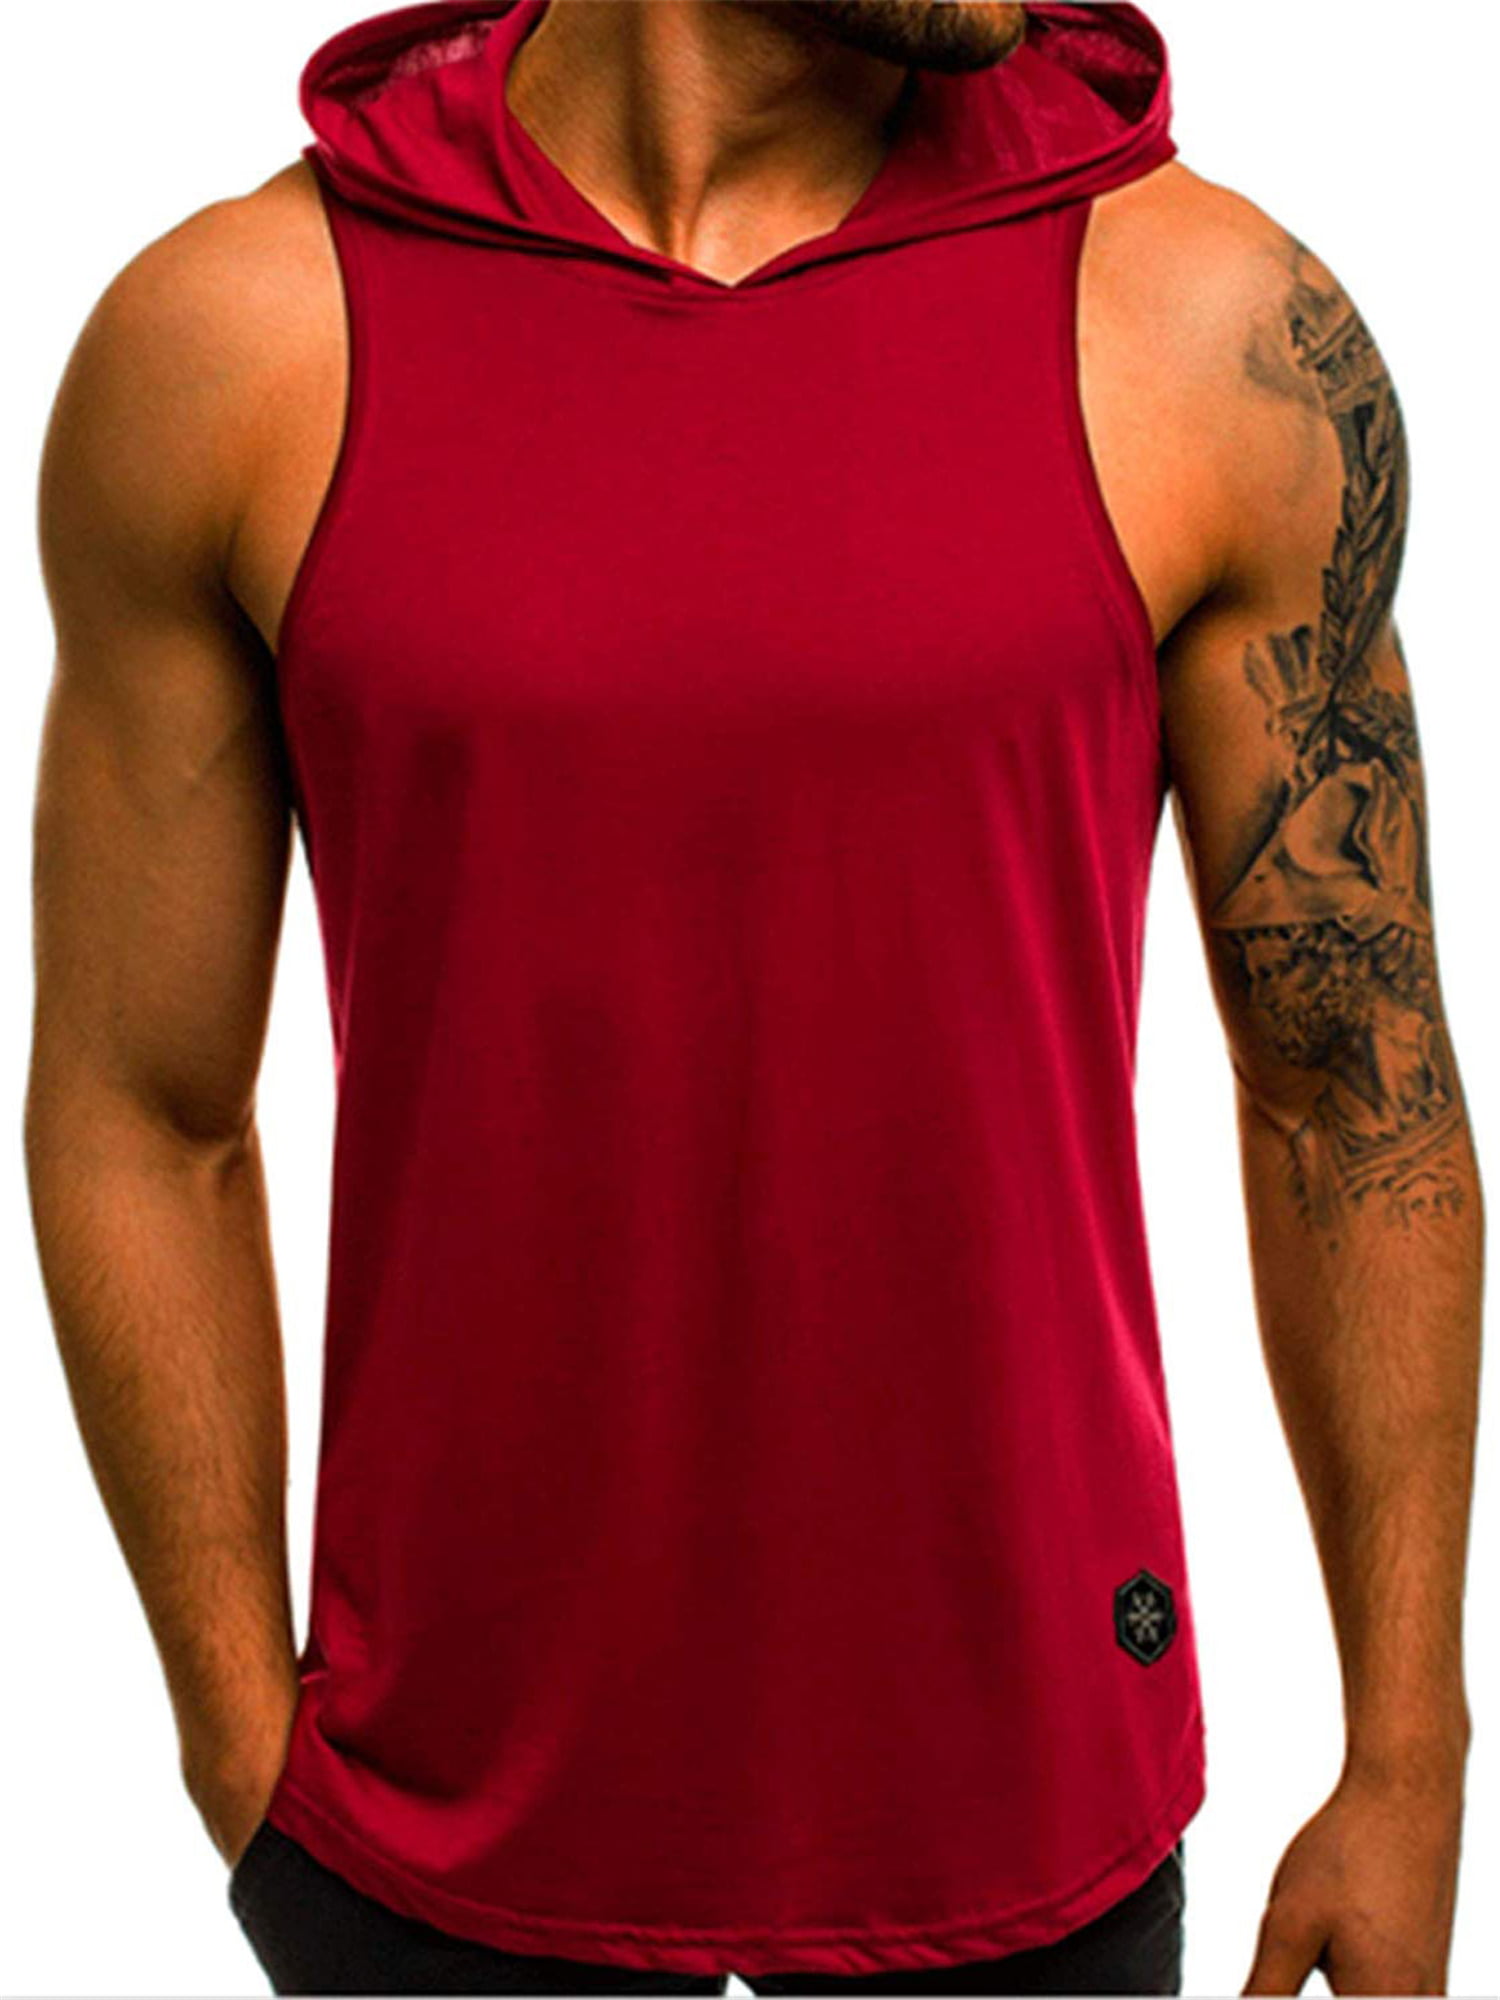 Mens Hoodie Men's Workout Hooded Tank Tops Sports Training Sleeveless Gym Hoodies Bodybuilding Cut Off Muscle Shirts 